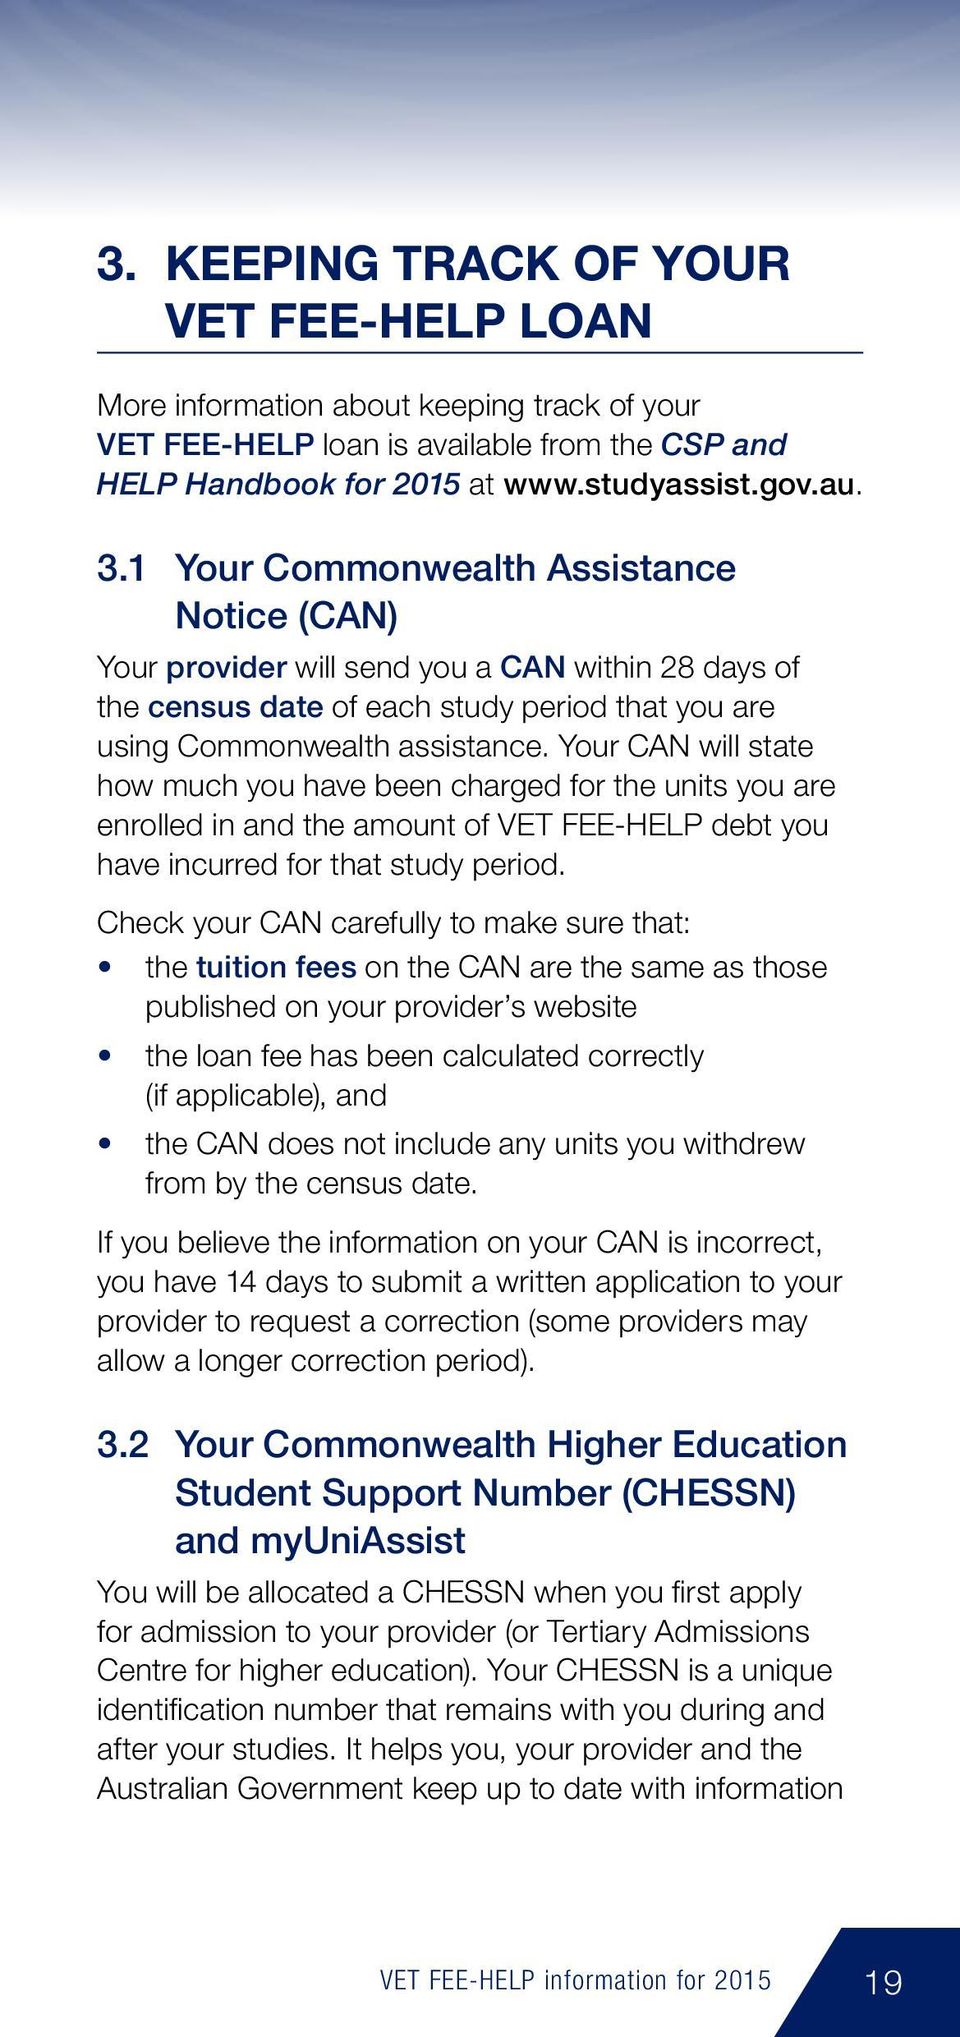 Your CAN will state how much you have been charged for the units you are enrolled in and the amount of VET FEE-HELP debt you have incurred for that study period.